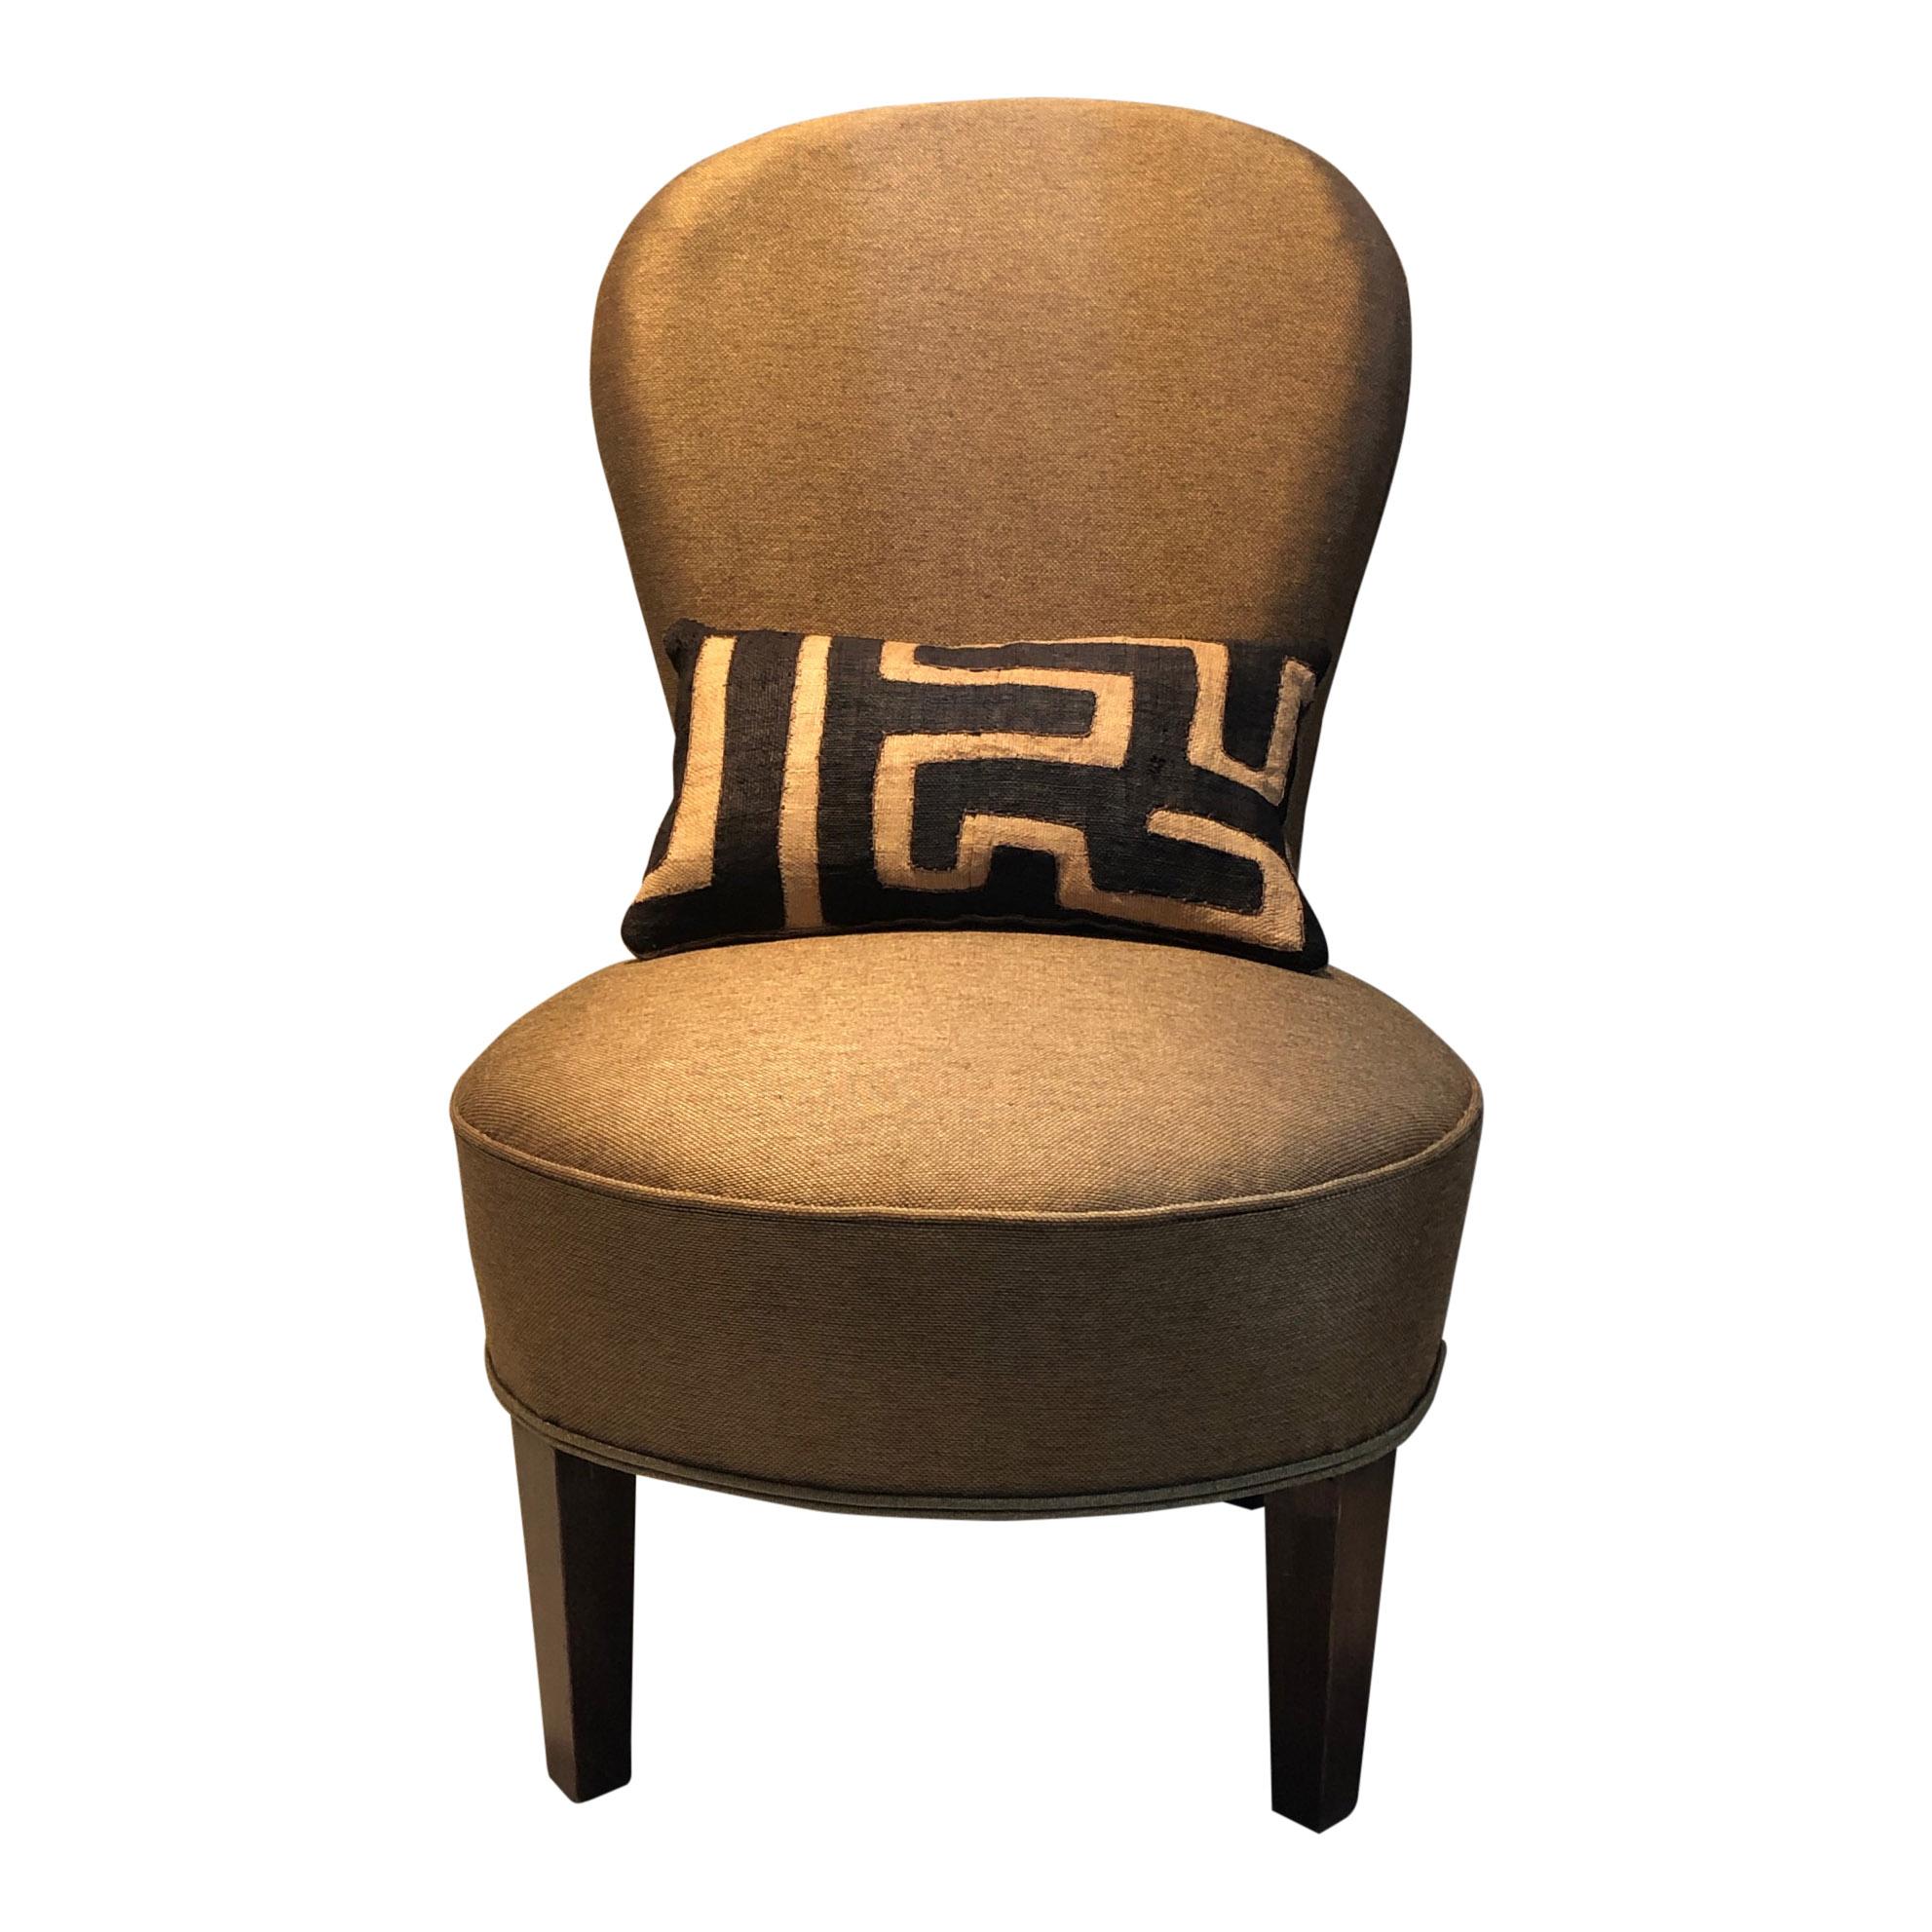 After the sober 1940s, there was a return to economic prosperity chair Raffia is a so called cocktail/club chair from the fifties. It is a small chair with a characteristic round back. The front has been covered with a new fabric Le Manachfrom